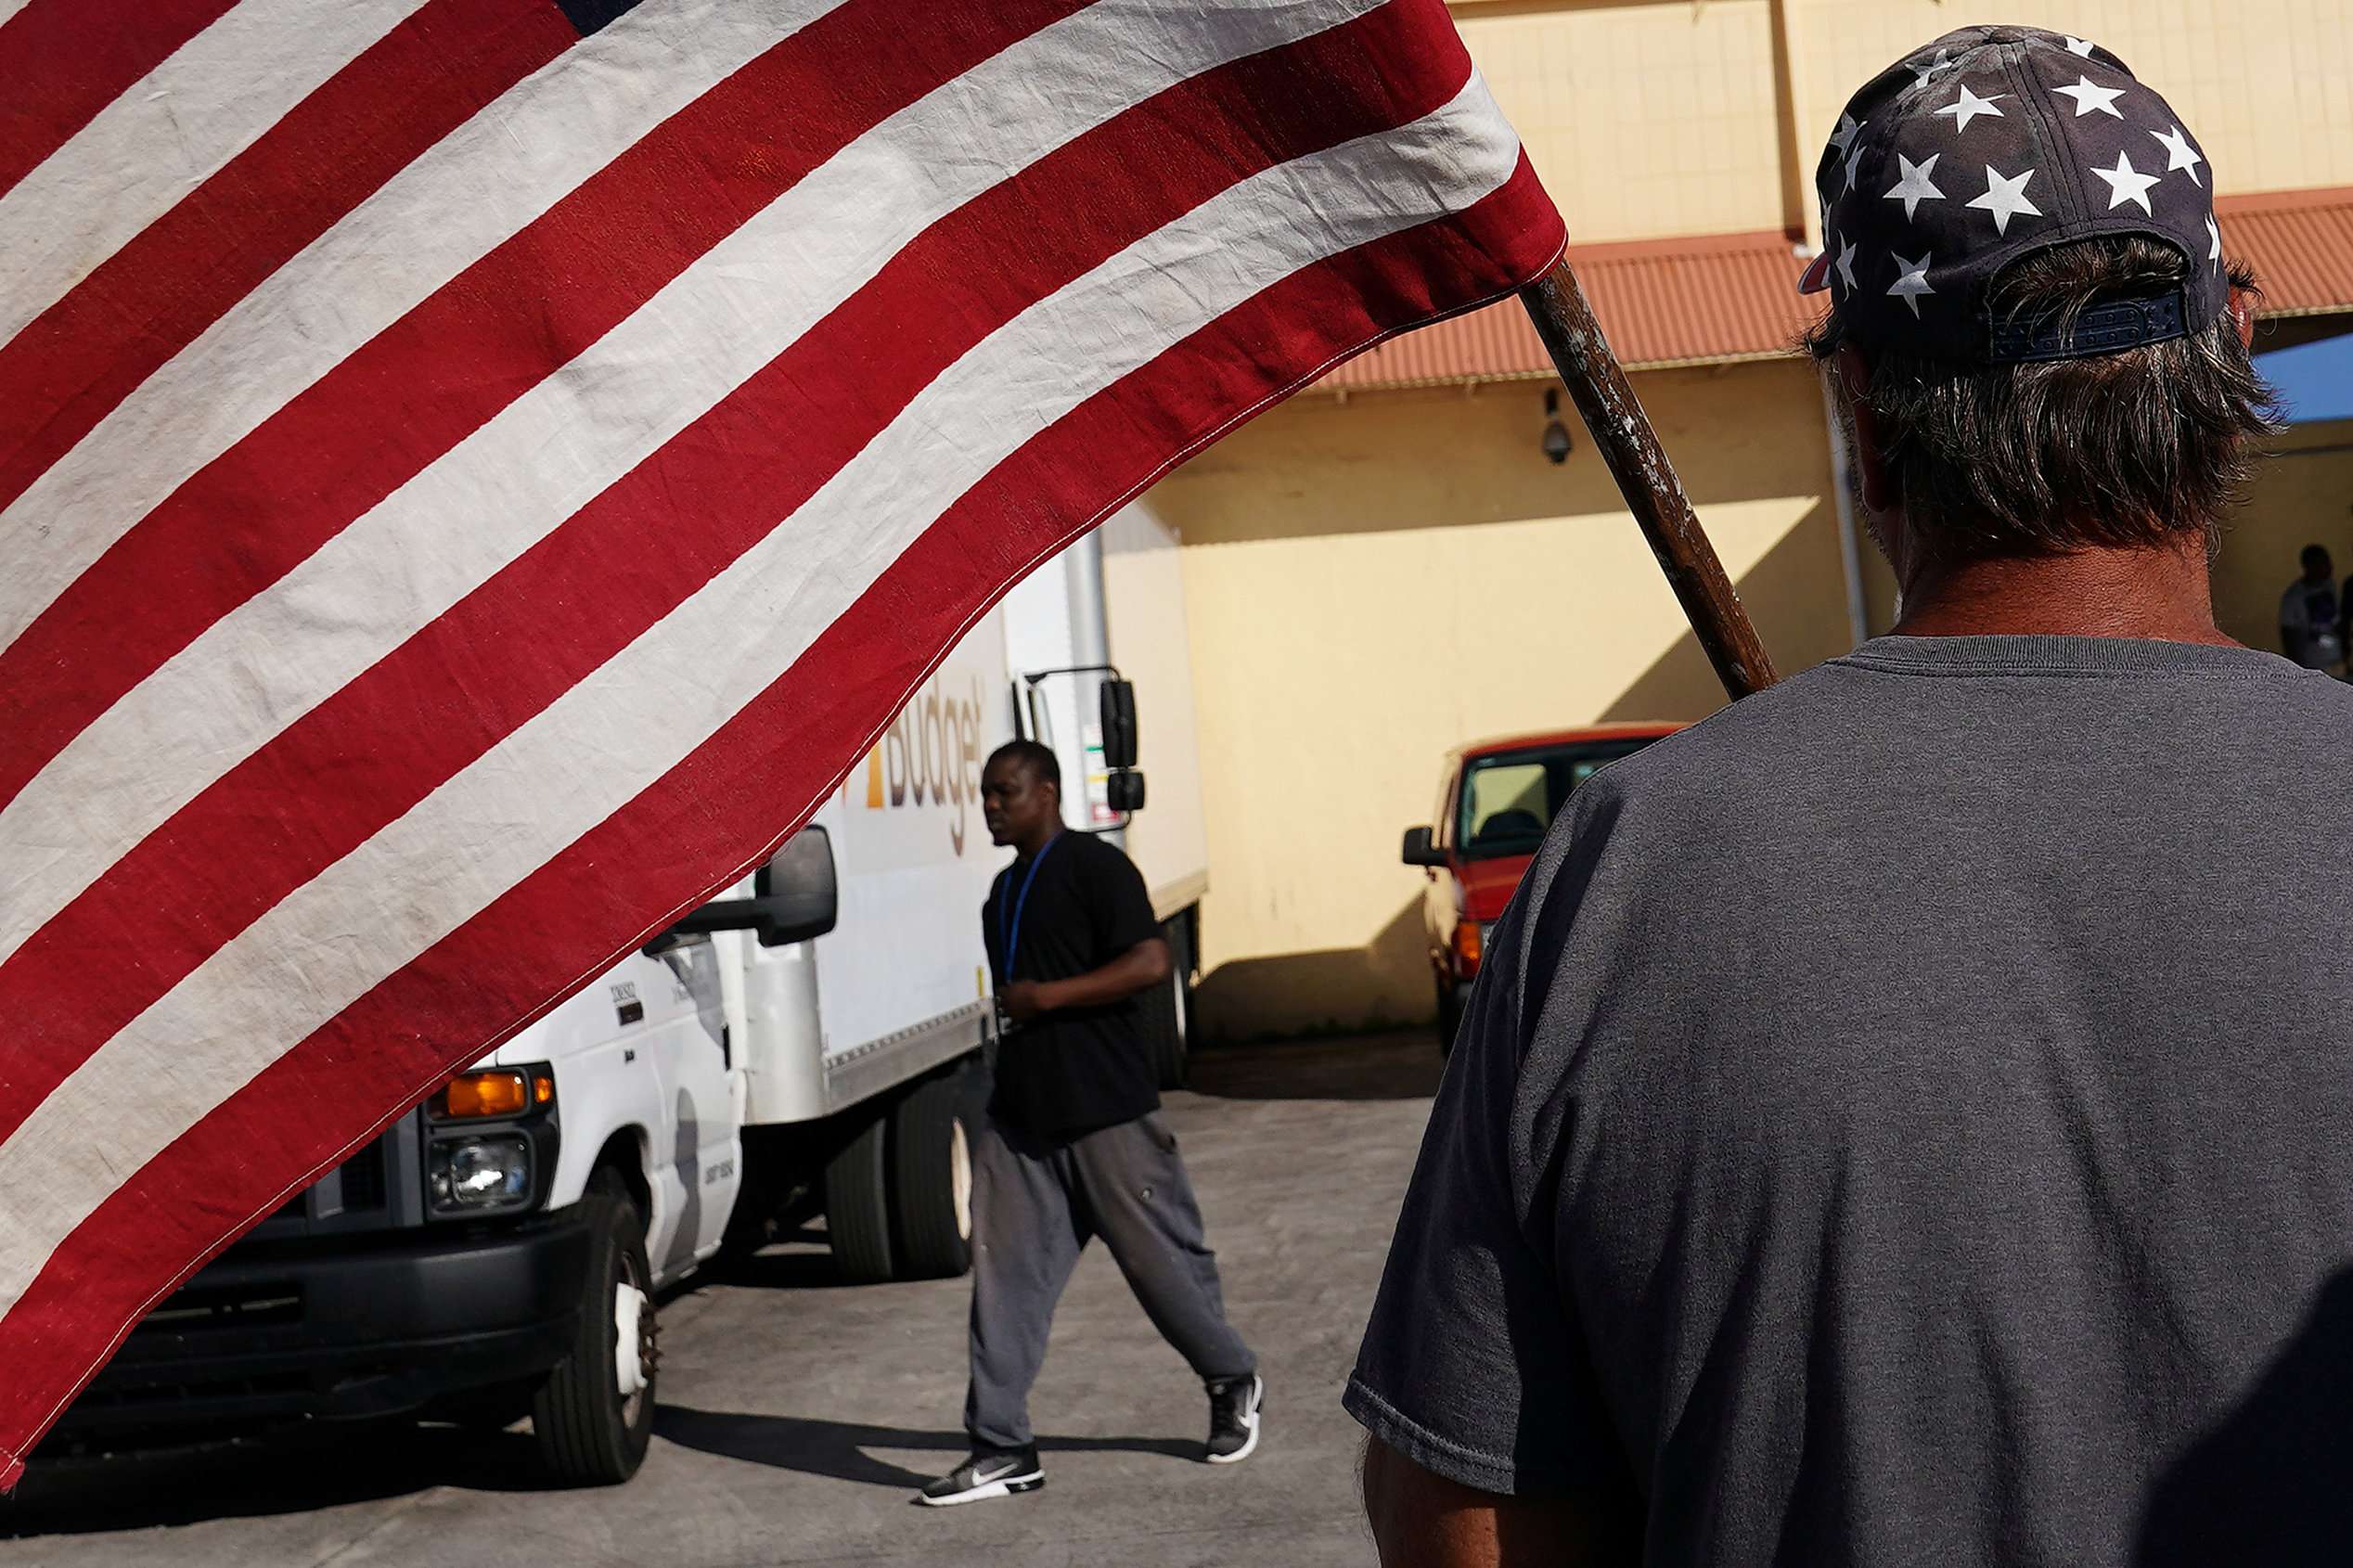 A man holding a flag insults verbally another man outside Broward County election offices during a ballot recount in Lauderhill, Florida, US on November 12, 2018.